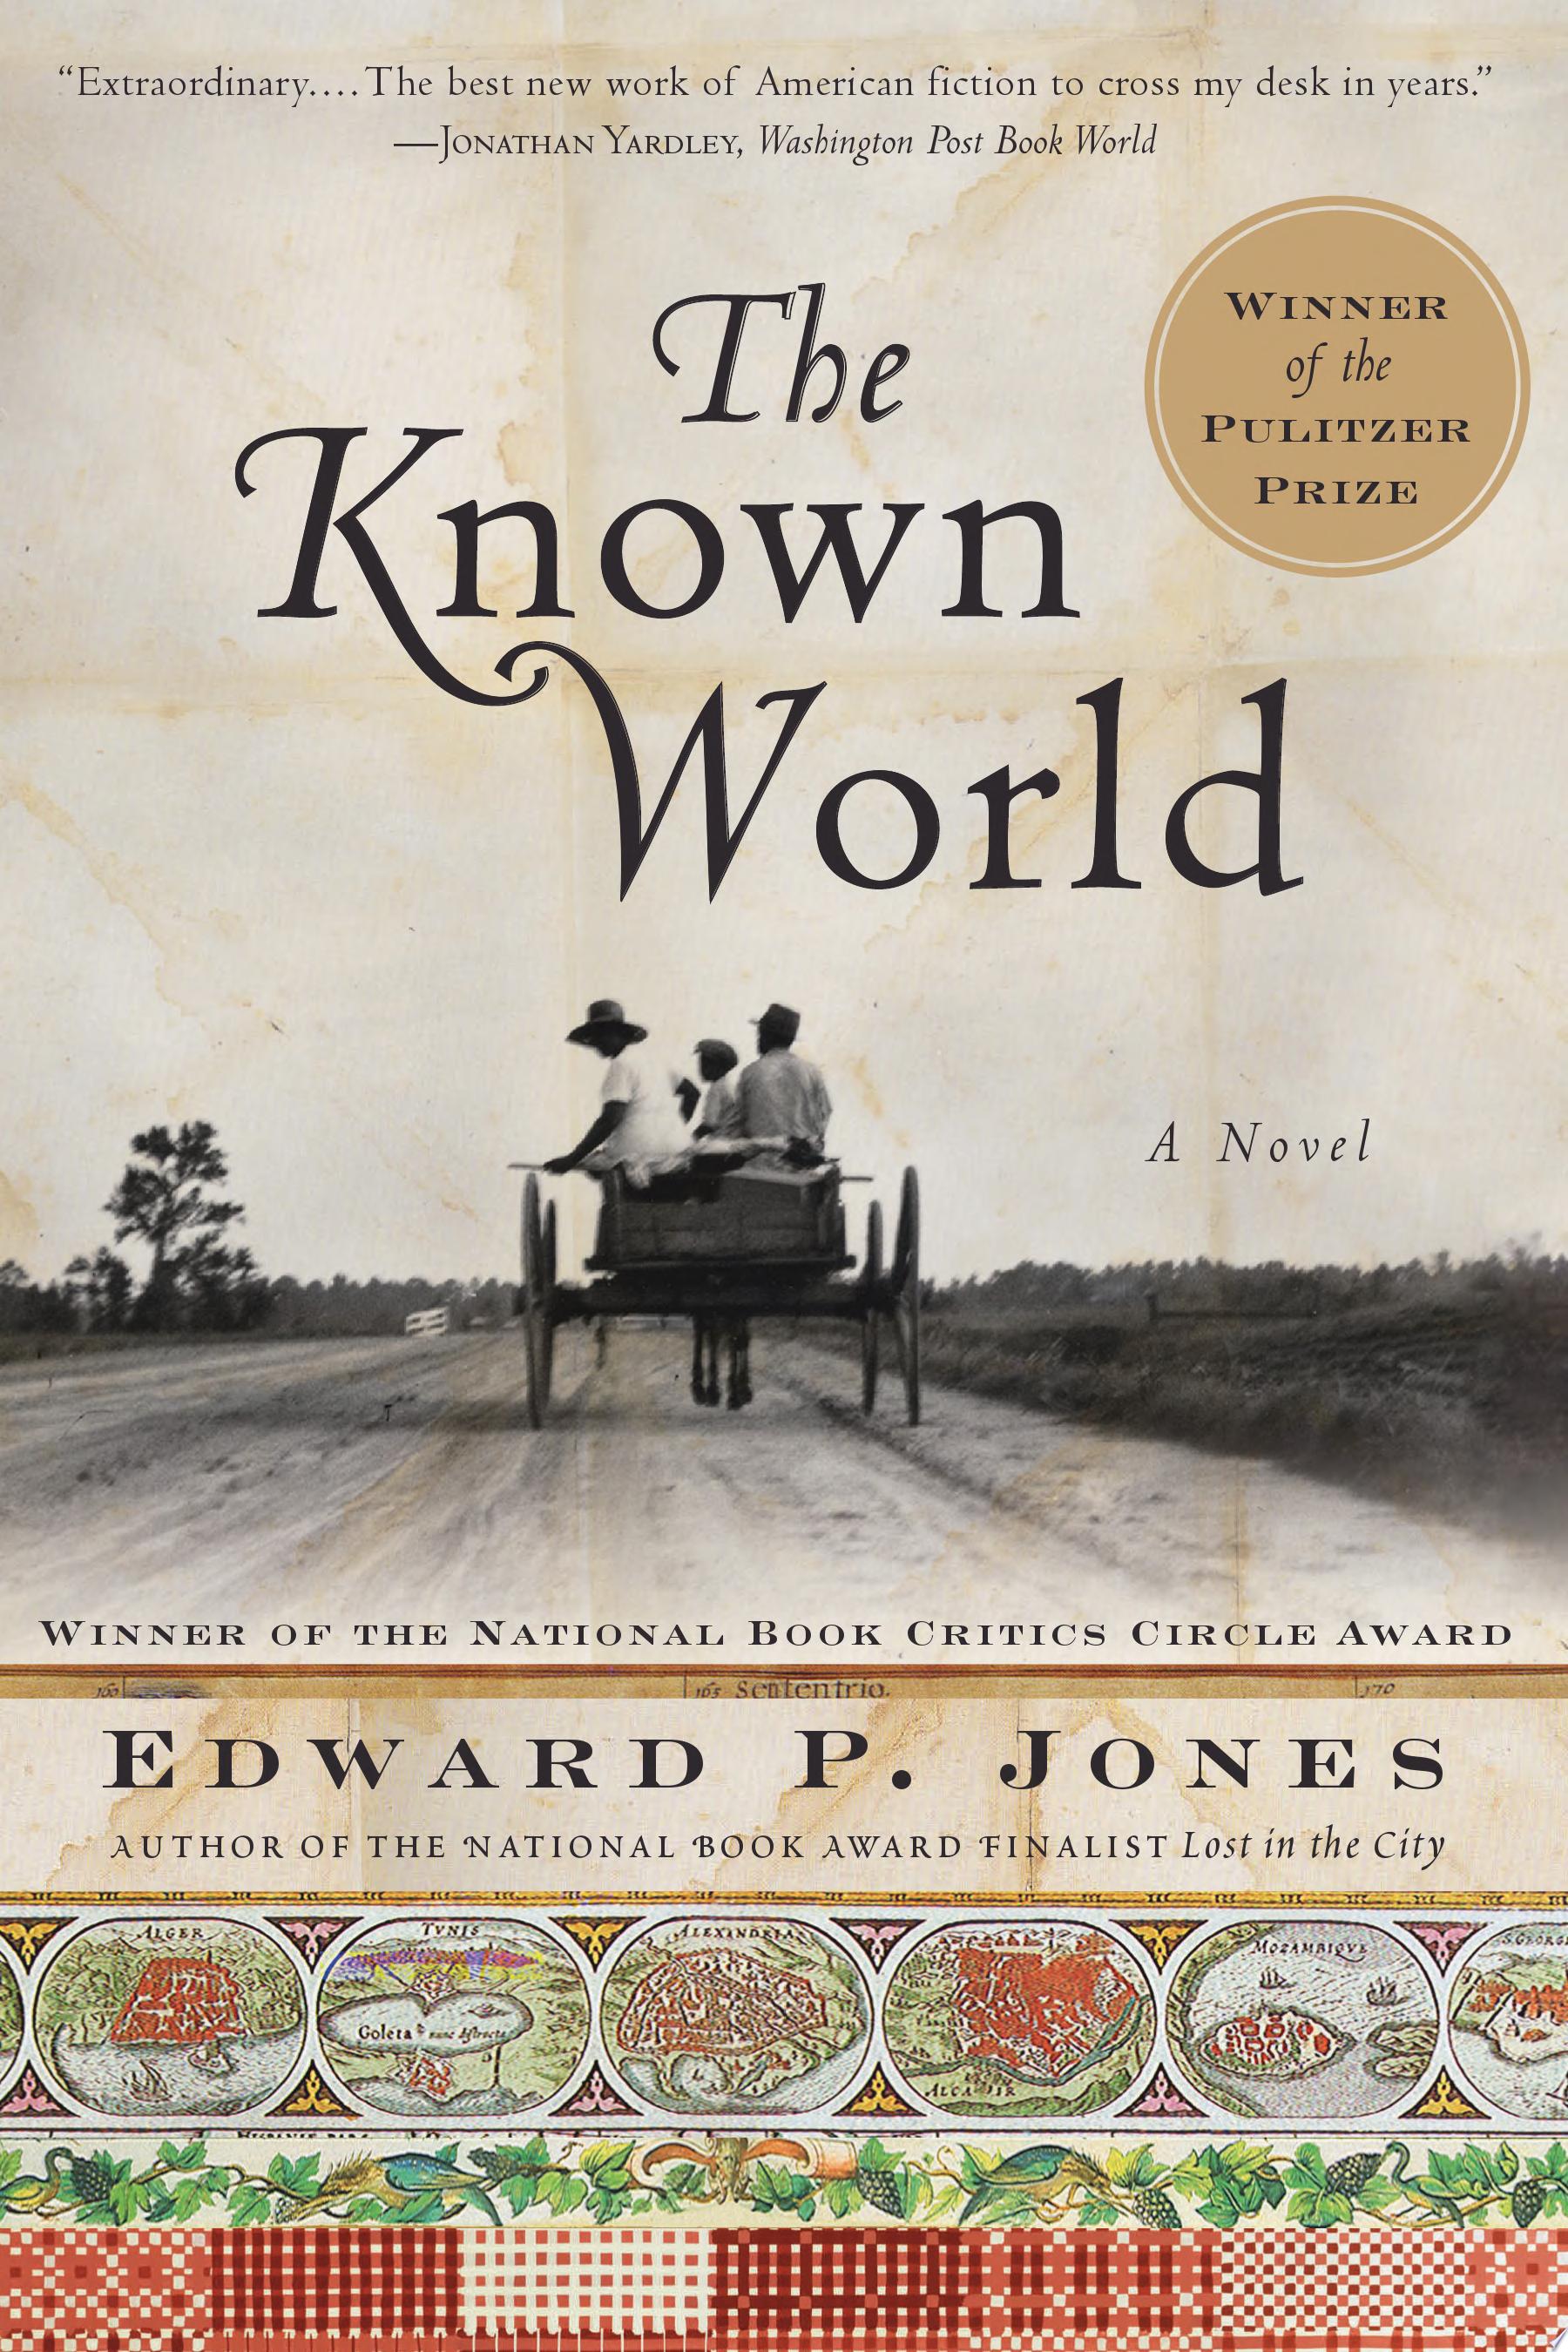 Image for "The Known World"